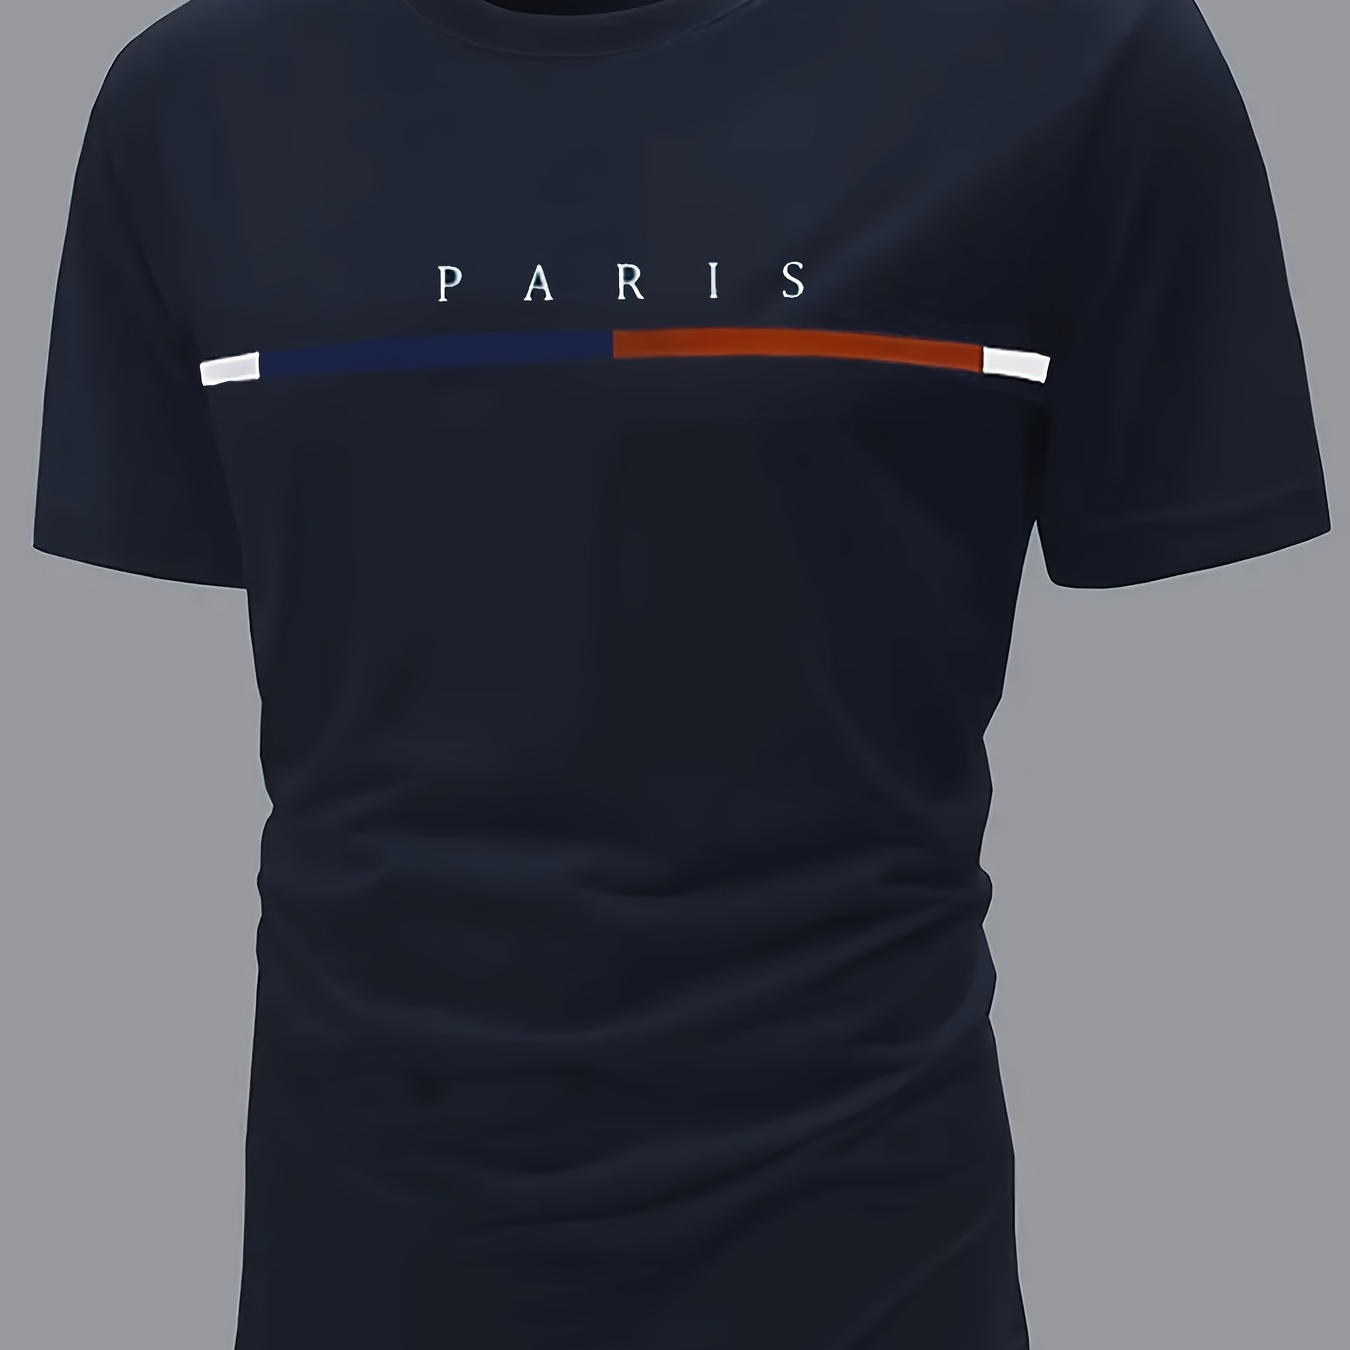 

Men's French Stripe Pattern And Letter Print "paris" Crew Neck And Short Sleeve T-shirt, Casual And Chic Tops For Summer Outdoors Wear